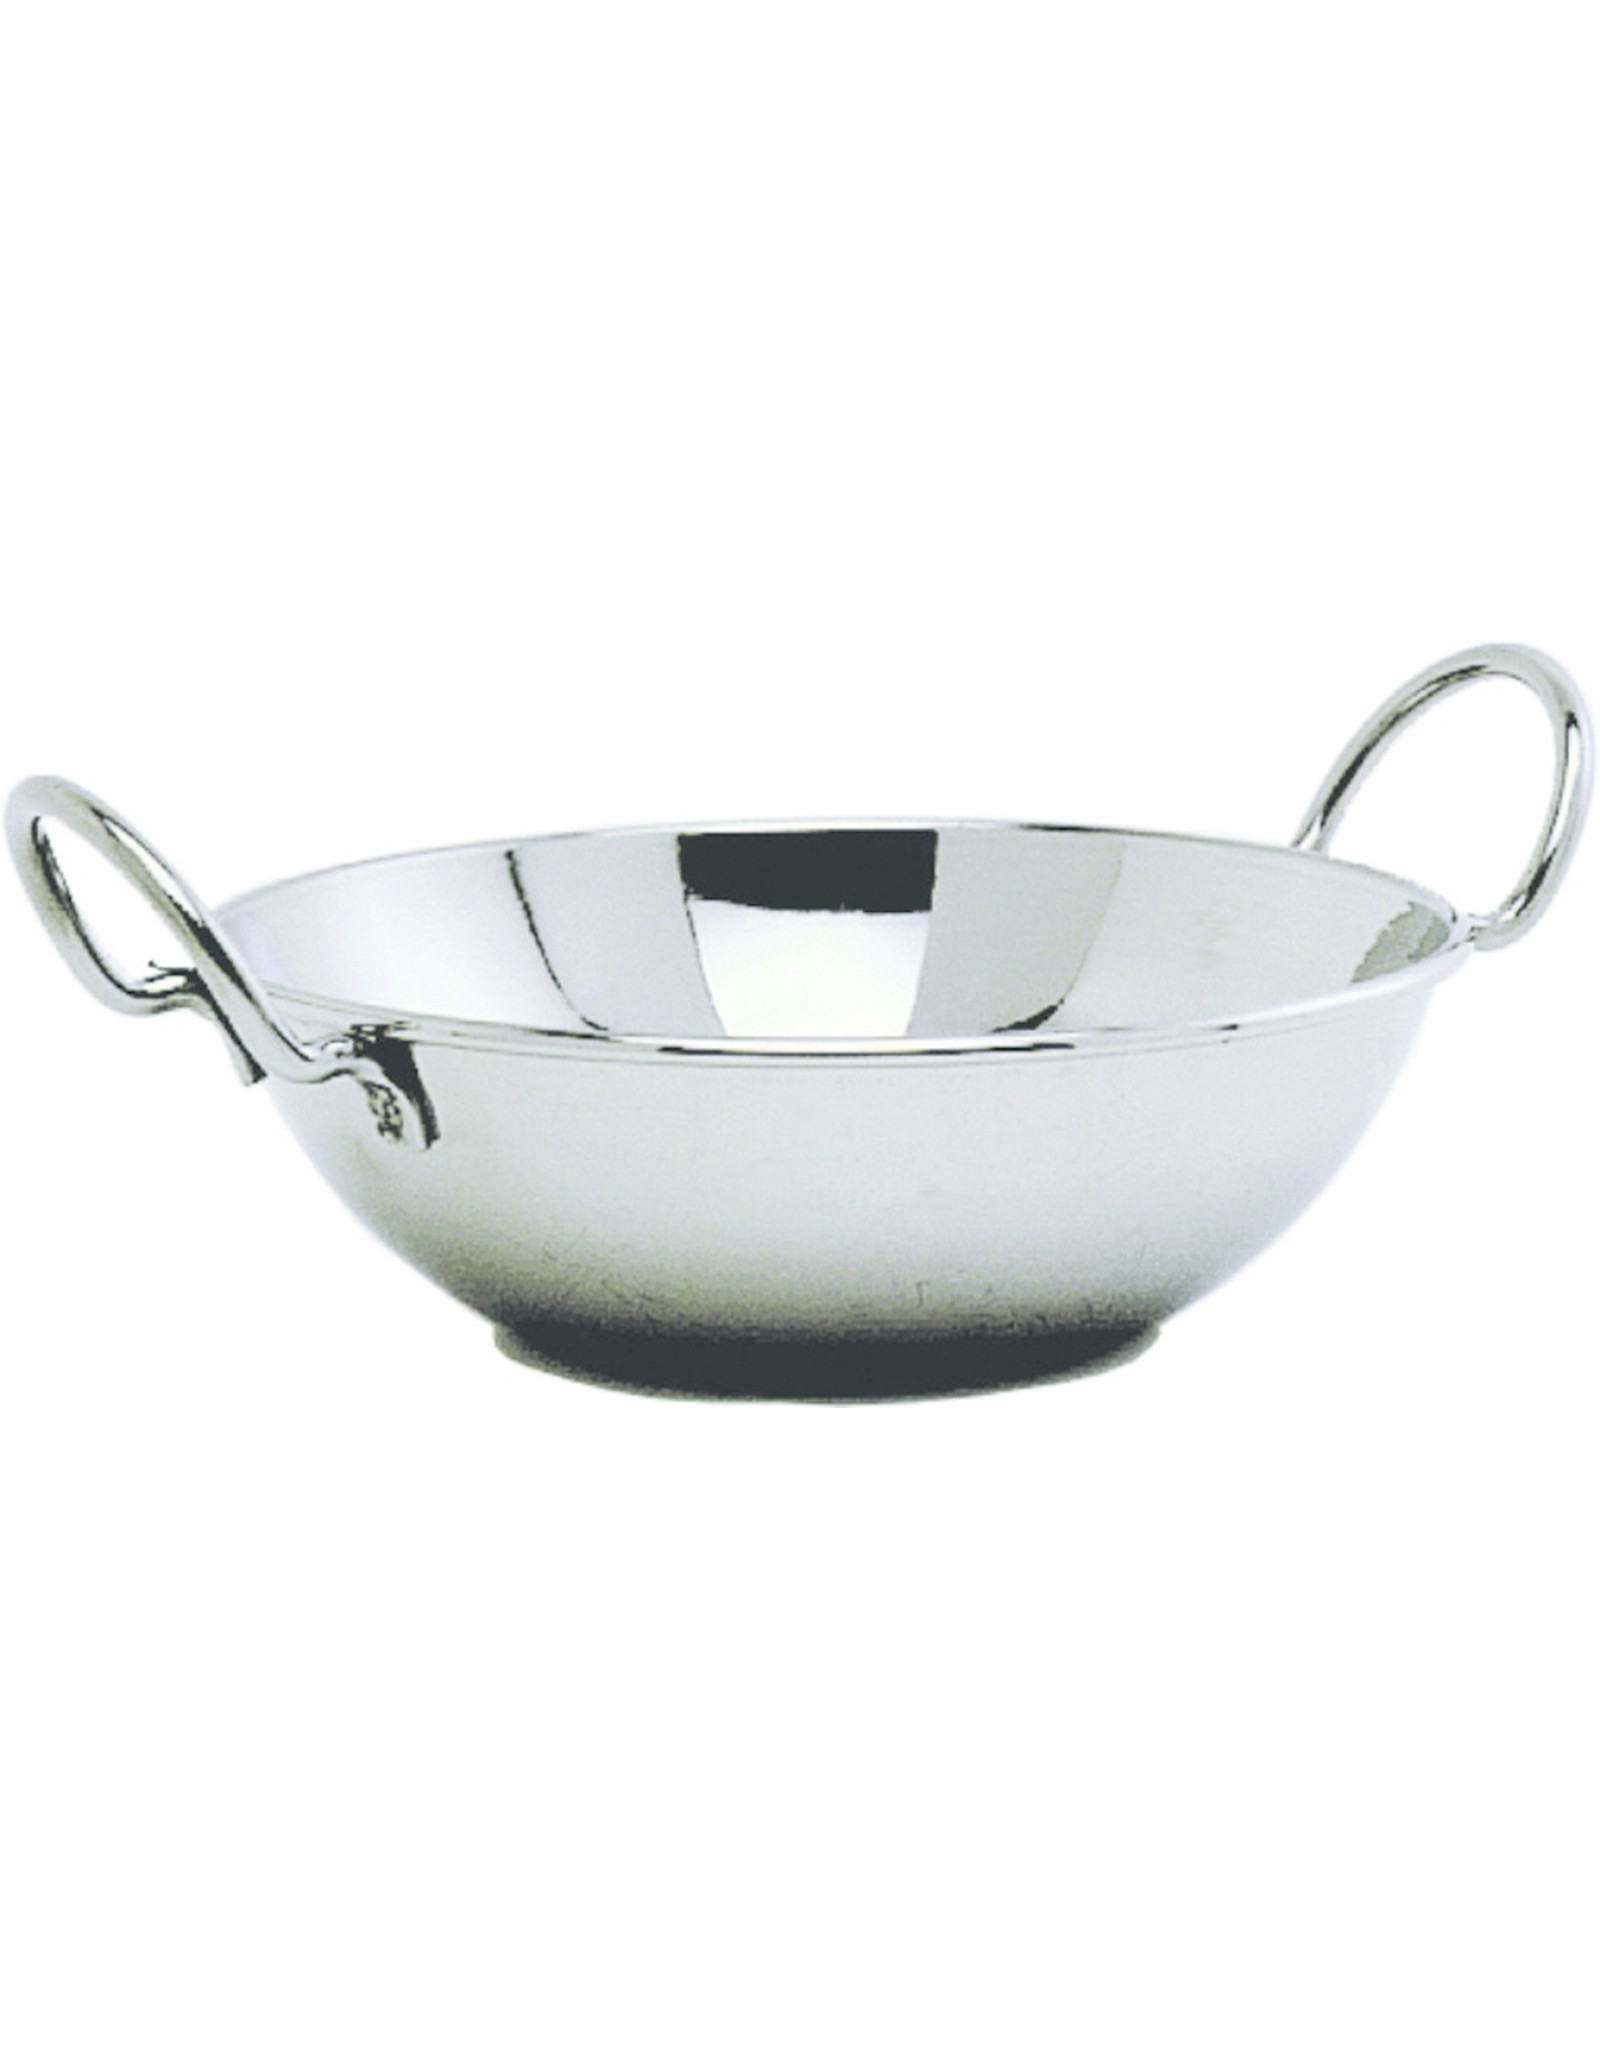 Stylepoint Stainless Steel Balti Dish 15 cm